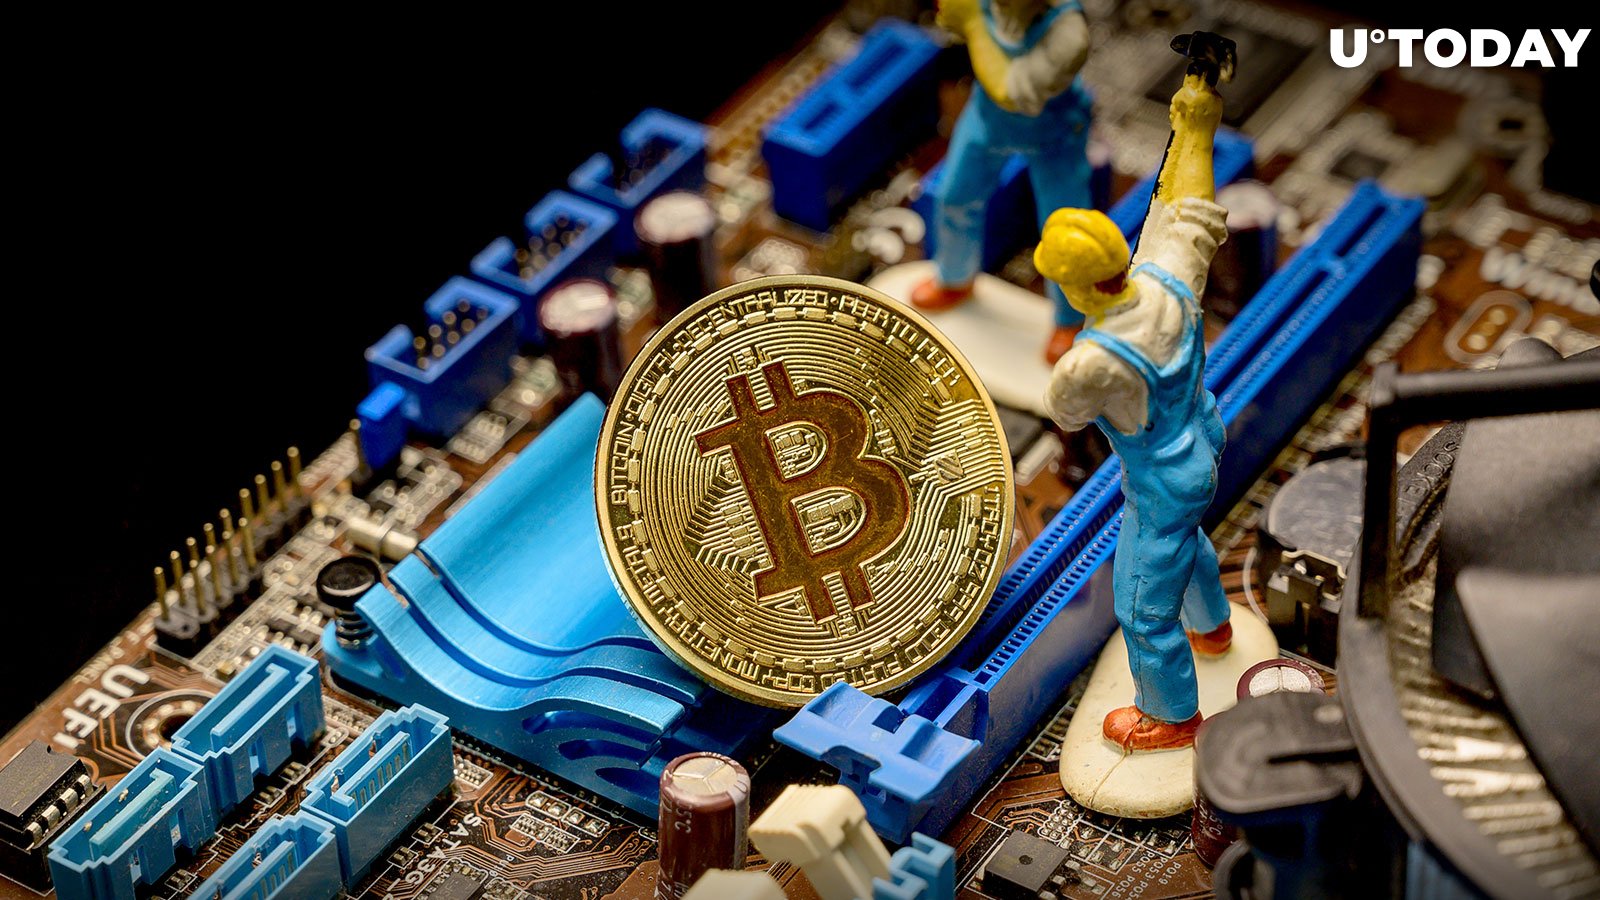 Bitcoin (BTC) Skyrockets in Miners' Profitability, Here's Why